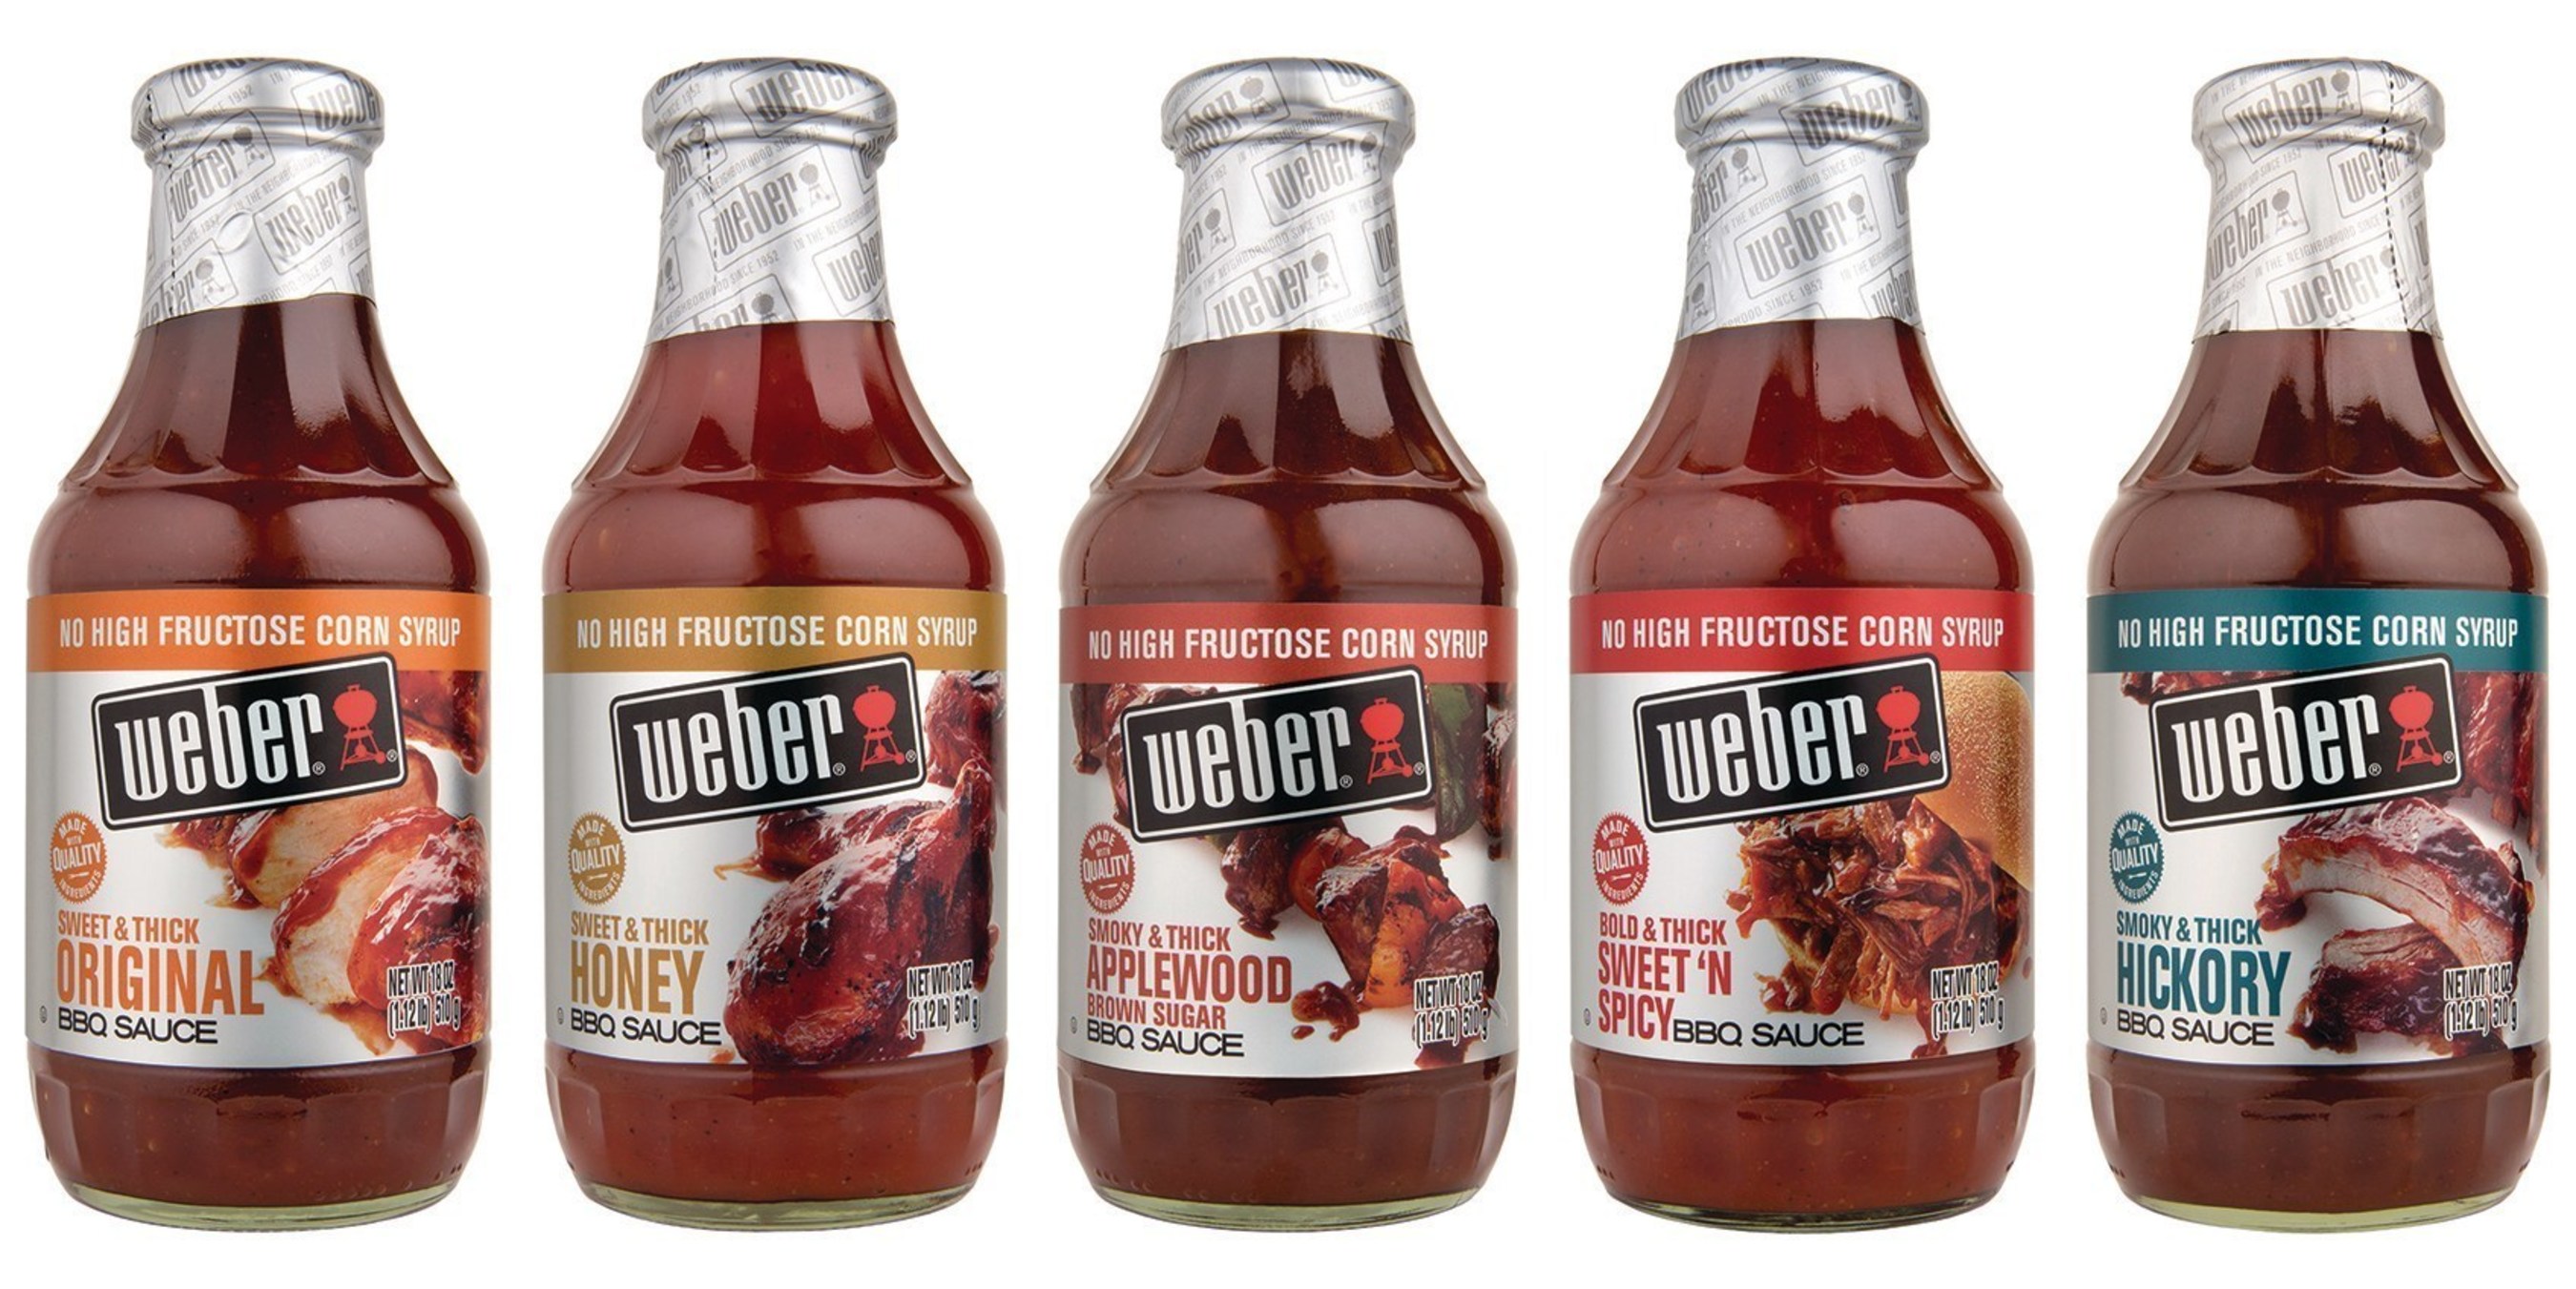 New and Improved Weber BBQ Sauces Introduced For Summer Grilling Season